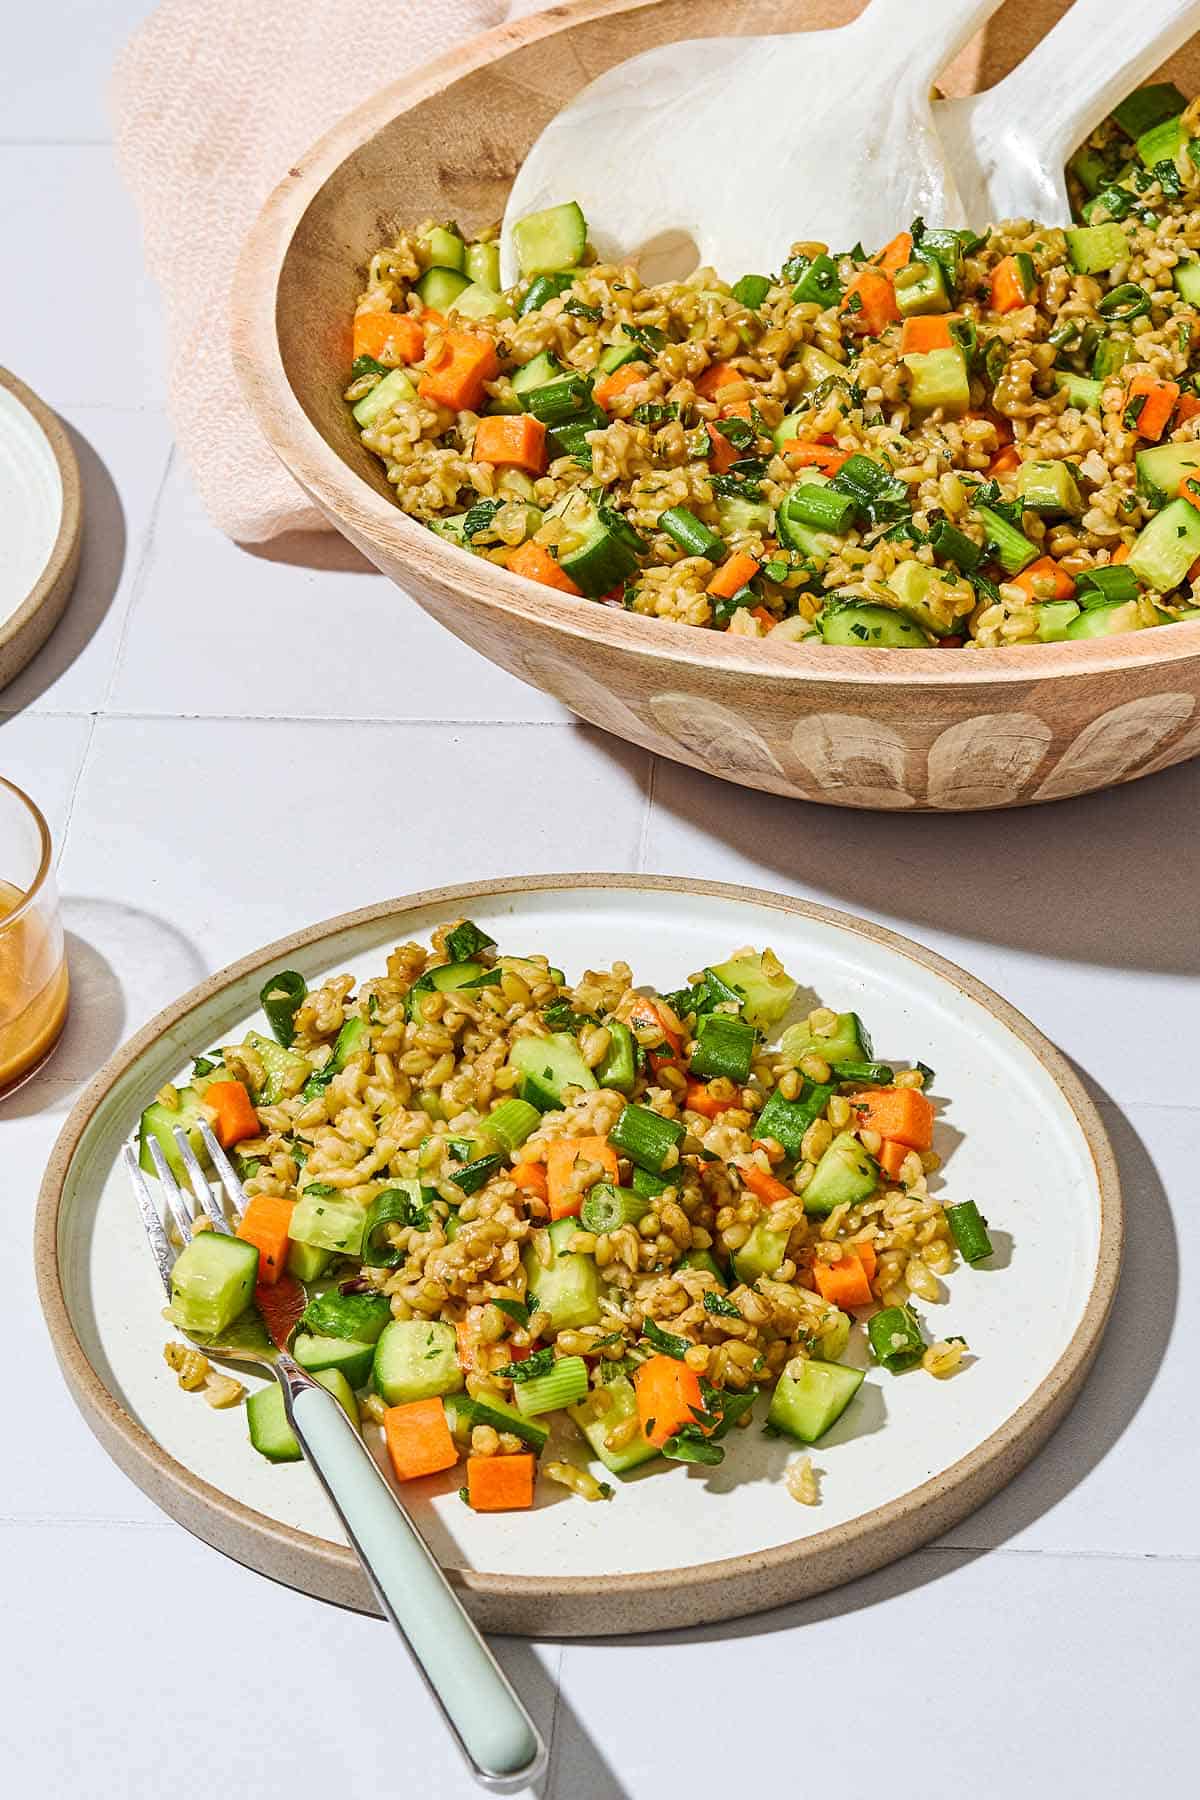 The herby freekeh salad in a serving bowl with serving utensils next to a serving of the salad on a plate with a fork.